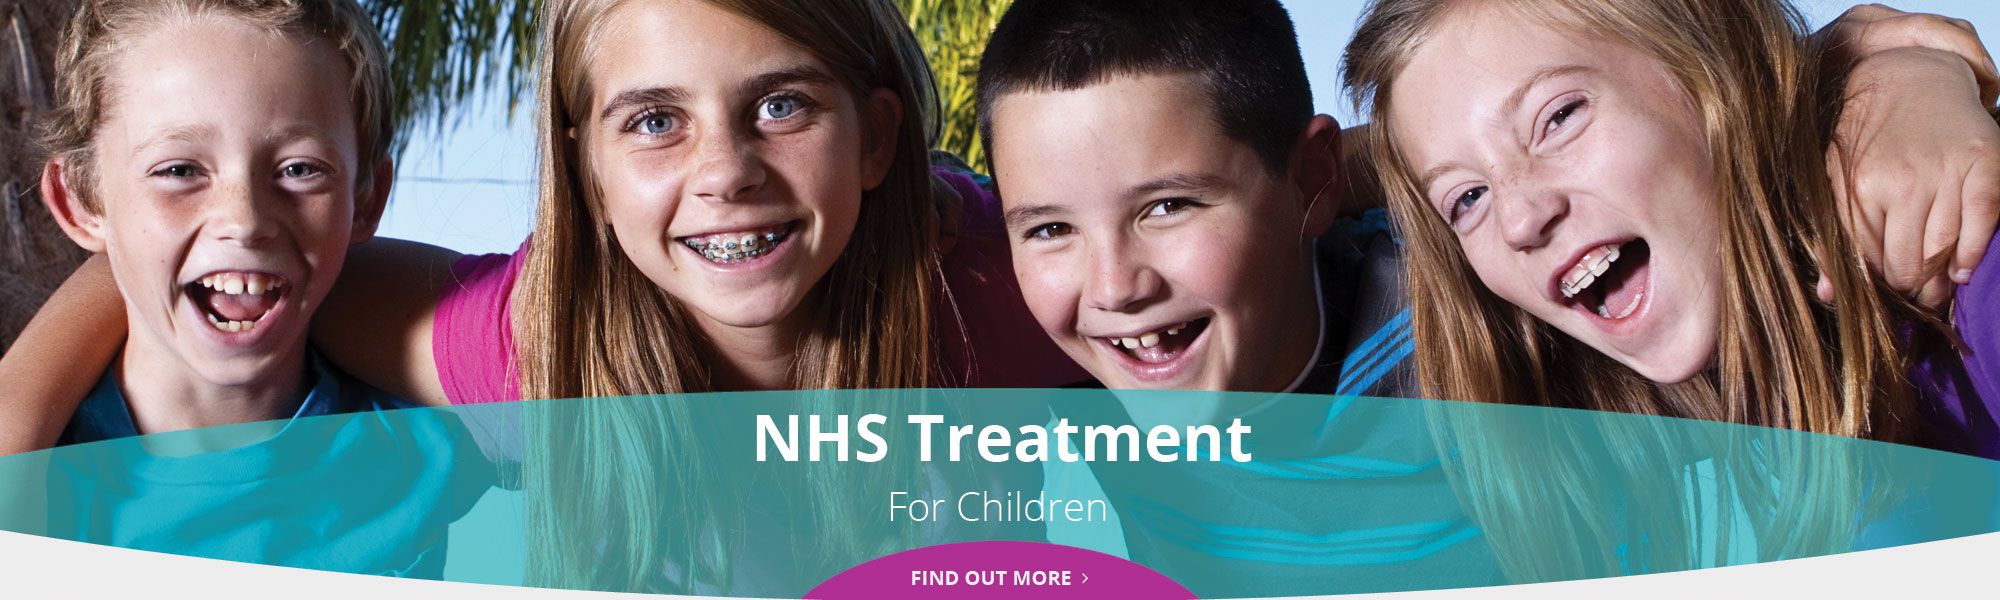 NHS Treatment for Children - Find out more